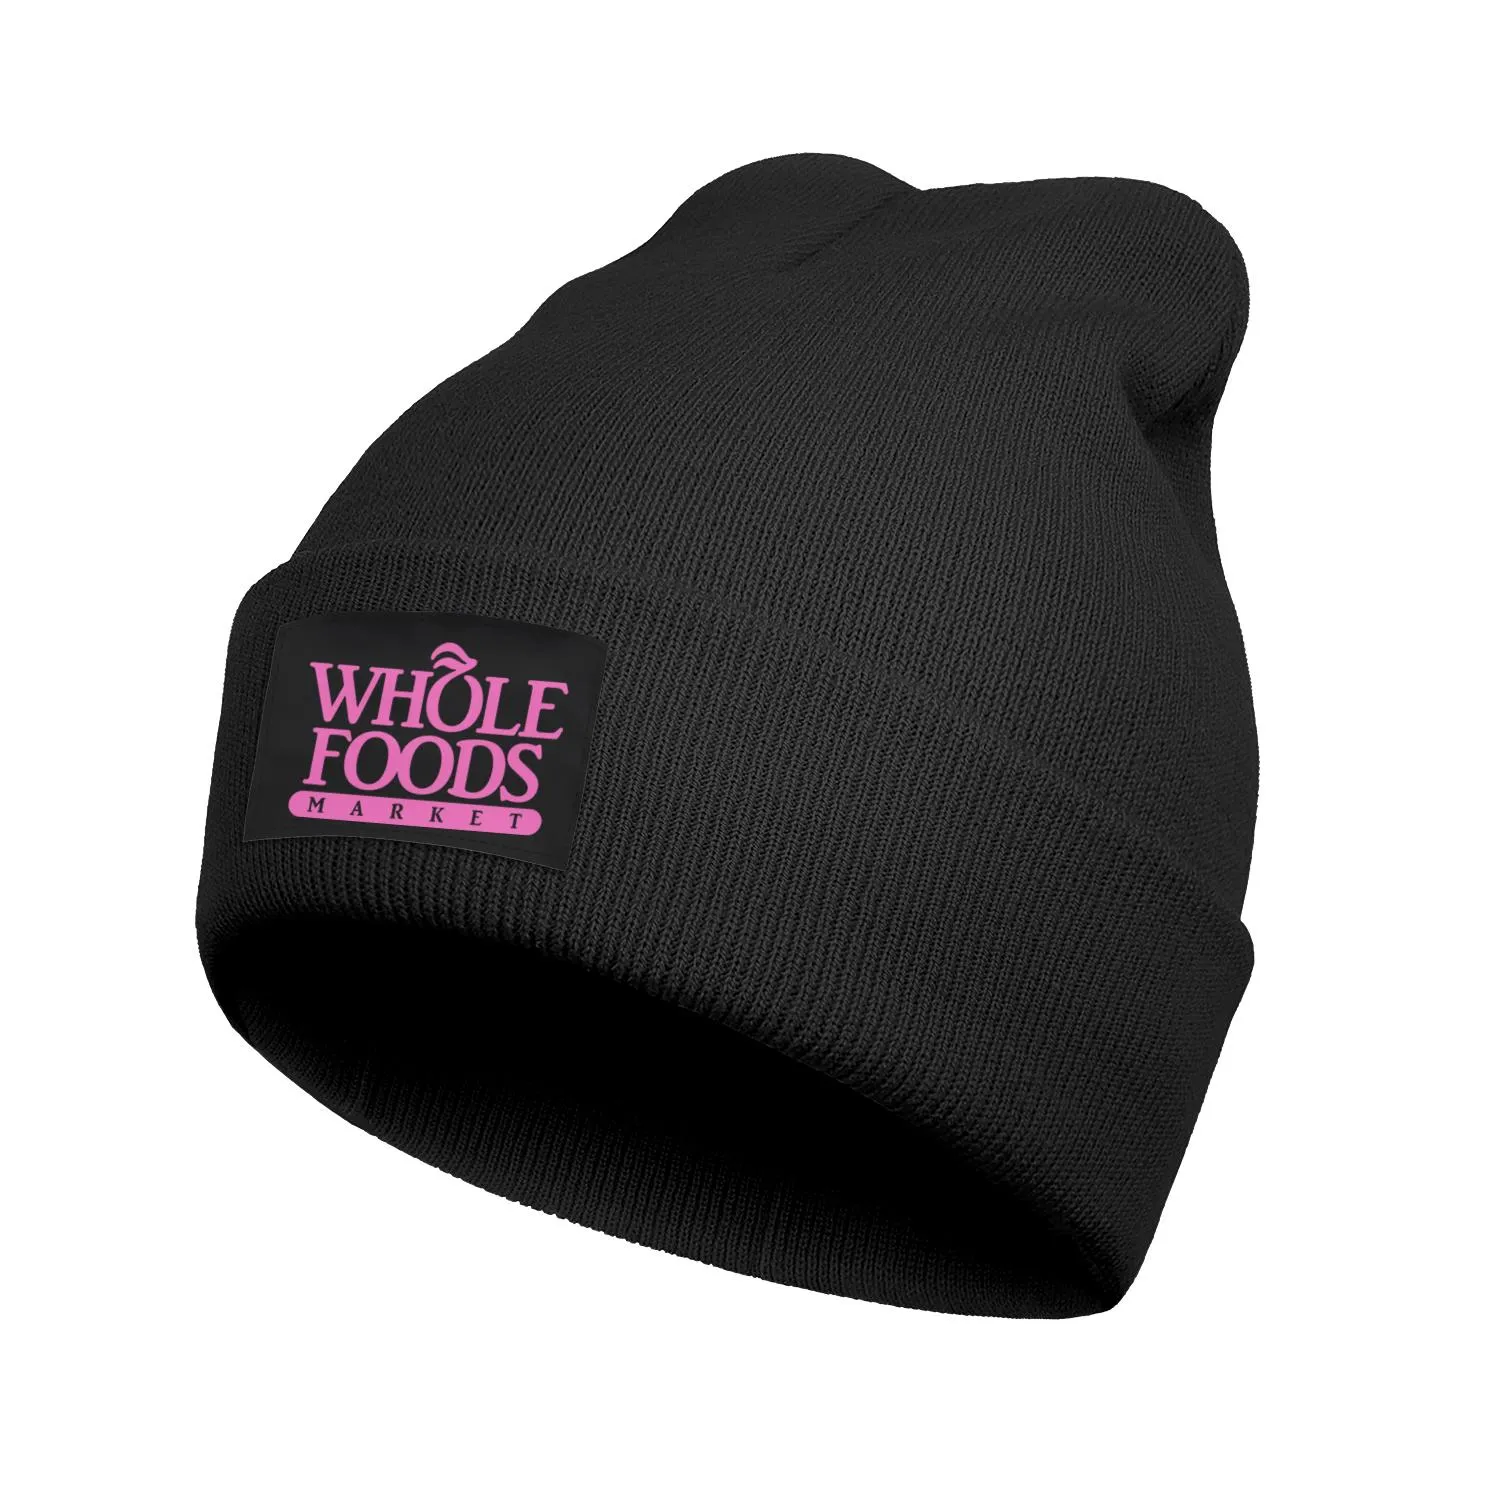 Mode Whole Foods Market Plaid Printing Winter Warme Beanie Skull Hats Street Dancing Pink Flash Gold White Marble Vintage Old4127921